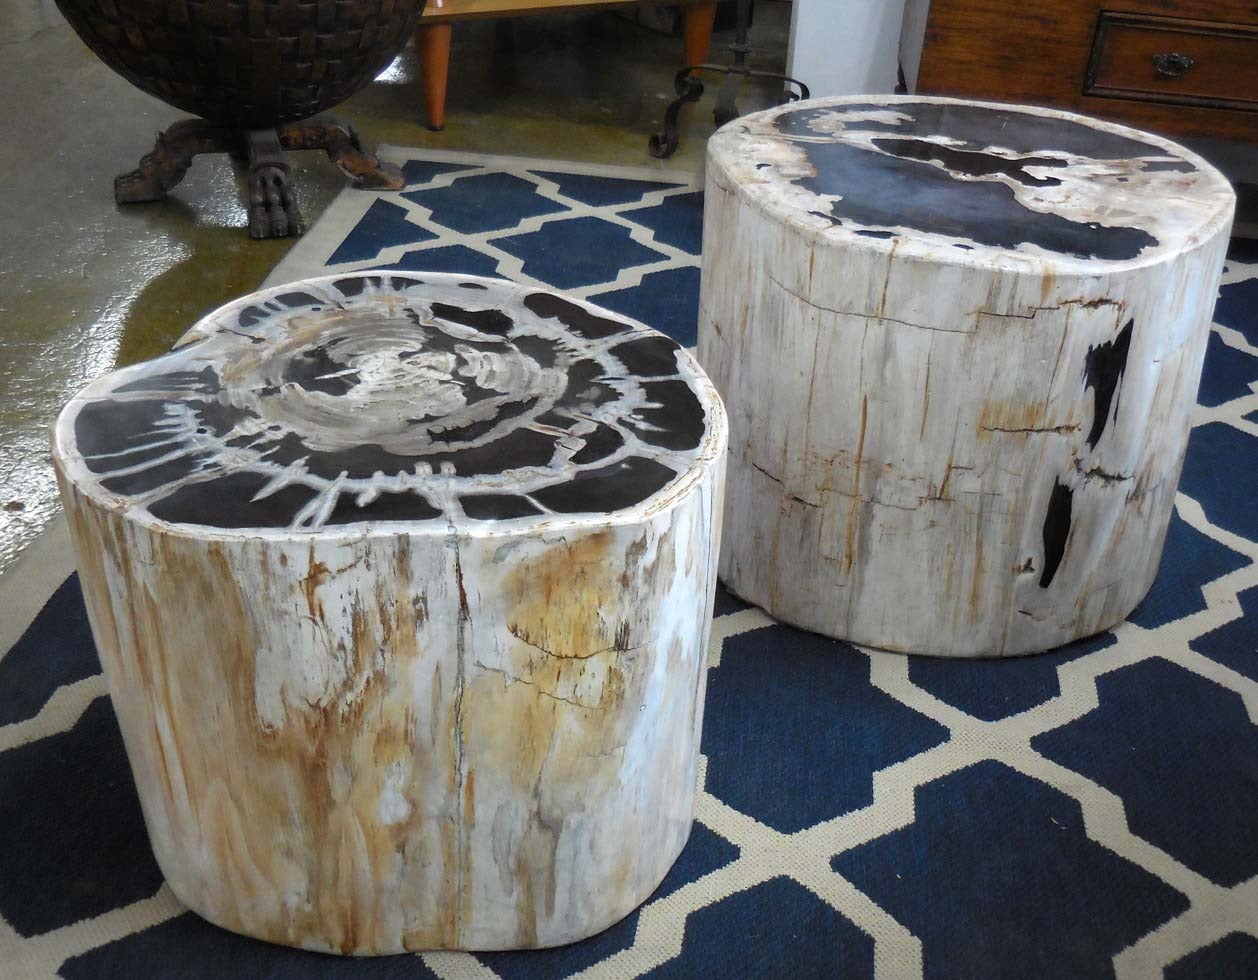 Exceptionally large petrified wood or stone side tables or stools. White, beige, browns and black variations. Left measures: 24.5 D x 20 H and the right measures 22 x 19 x 17.5 H.
Can be sold separately.